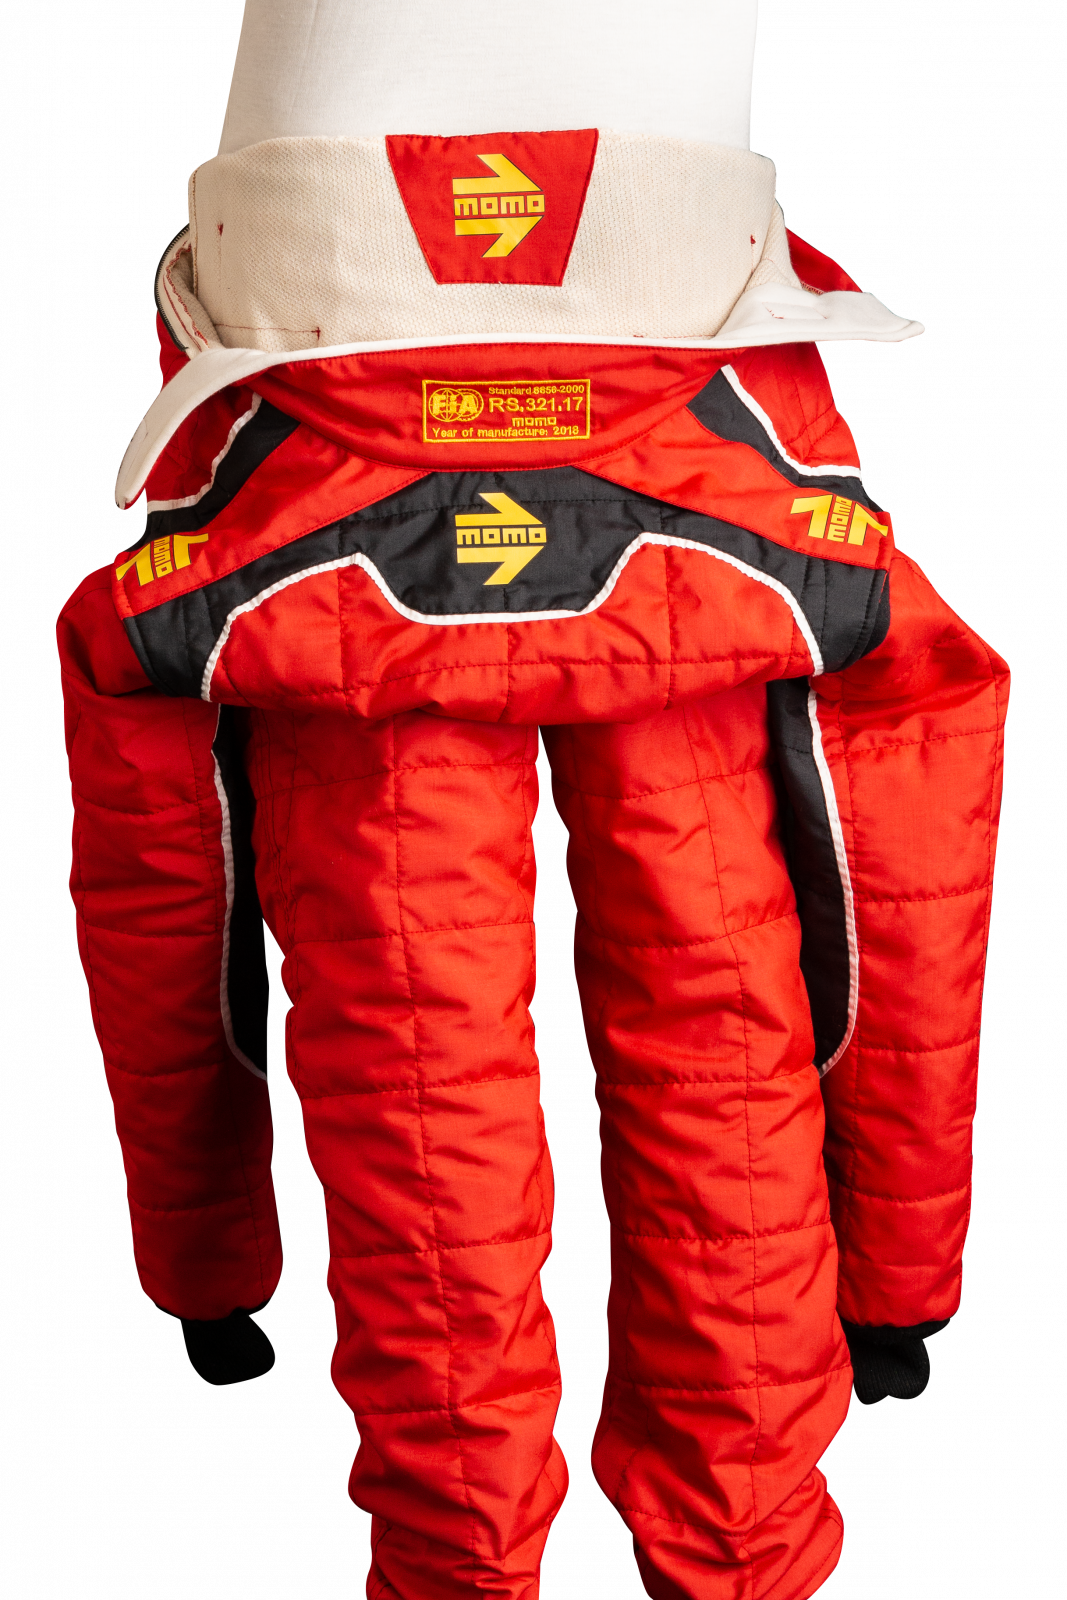 MOMO Corsa Evo Red Size 50 Racing Suit TUCOEVORED50